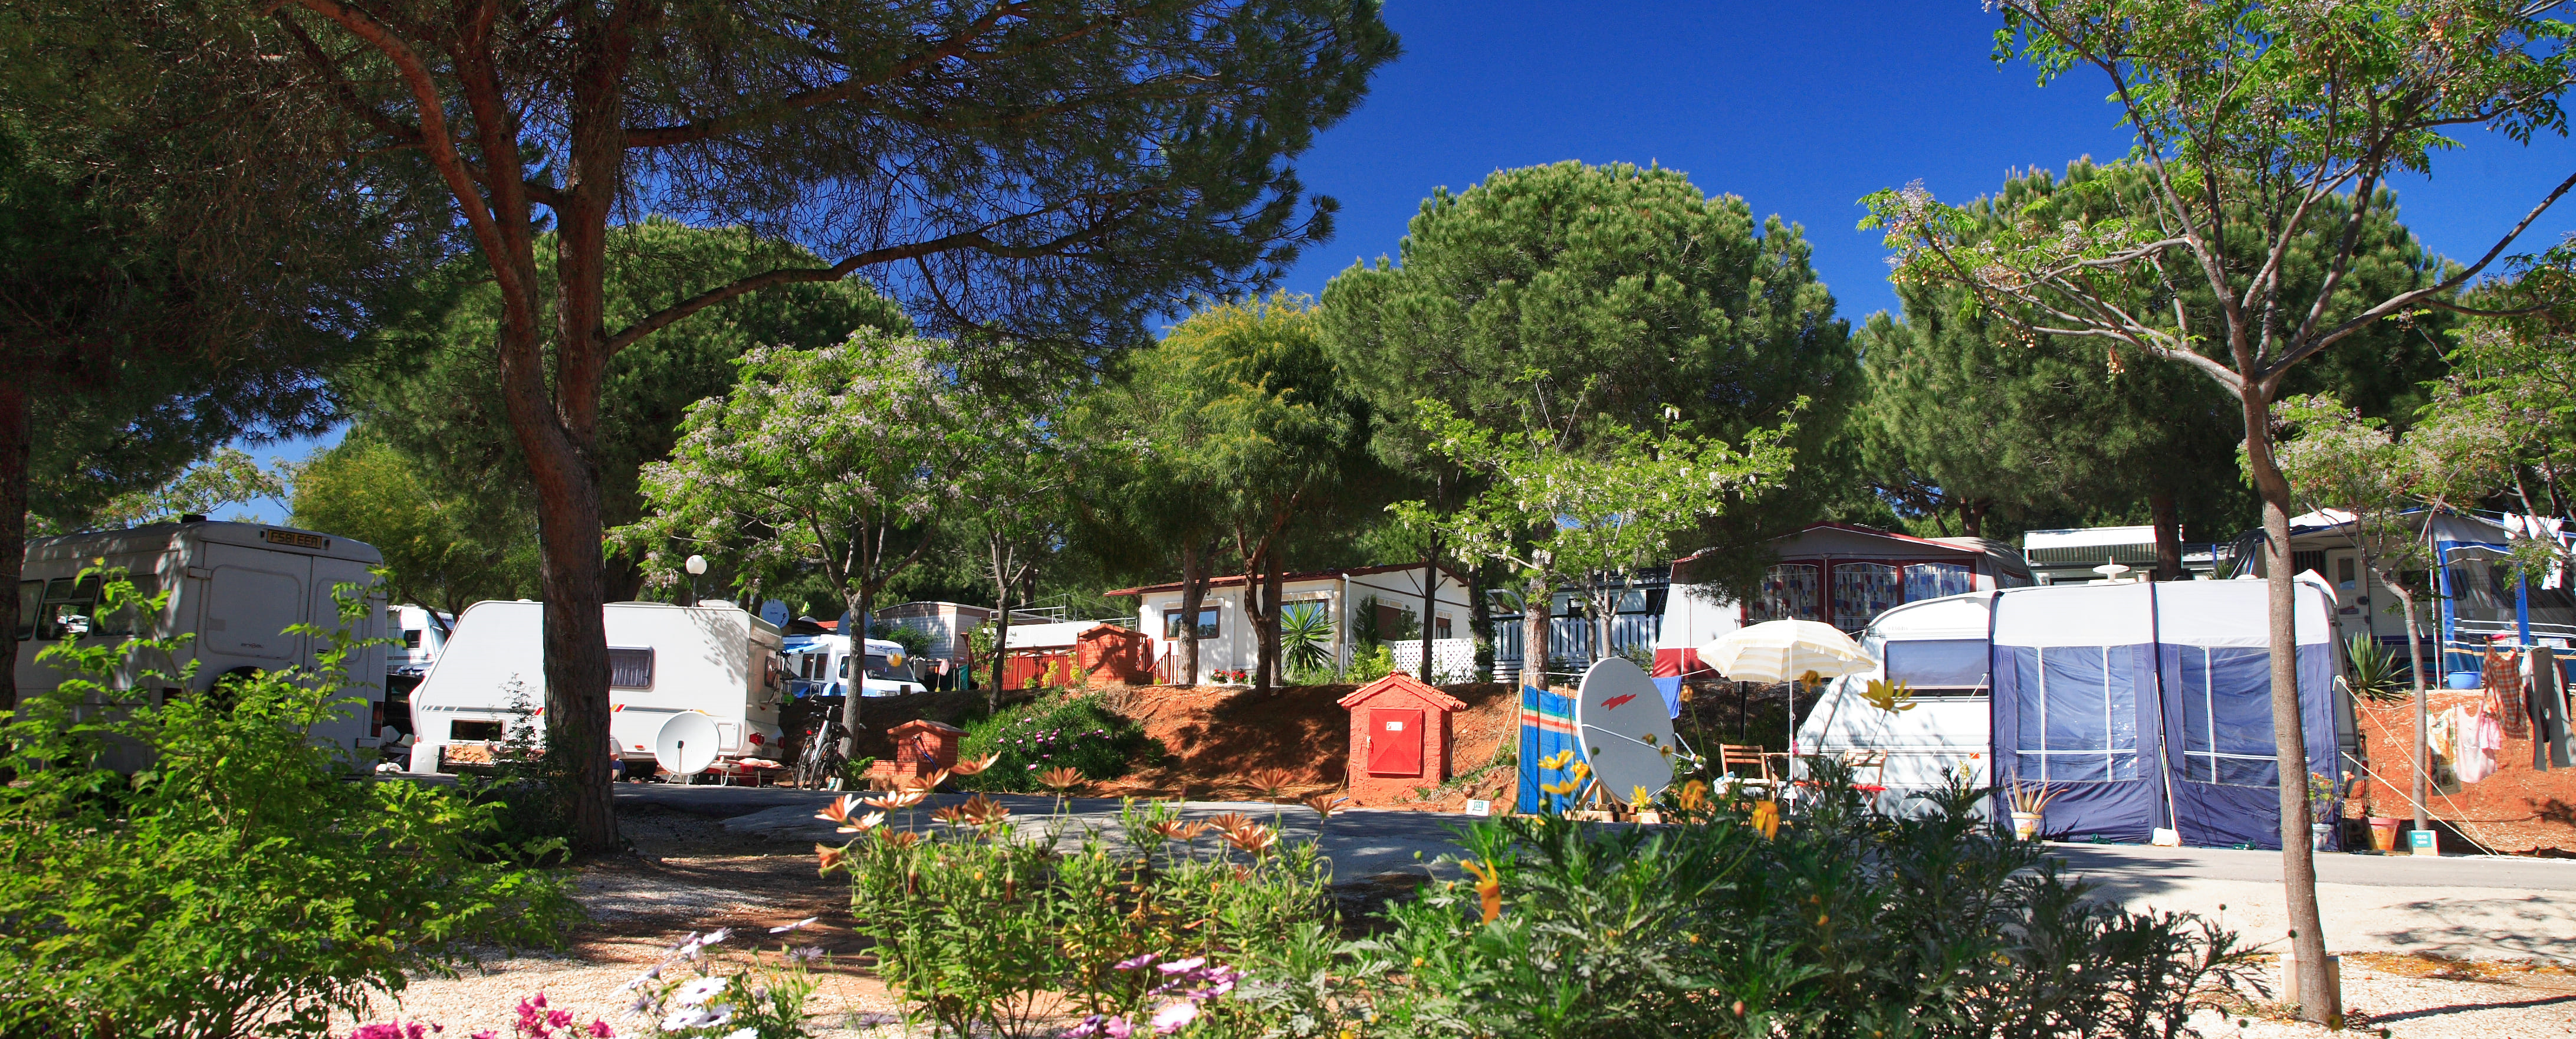 Camping Cabopino - Andalusien